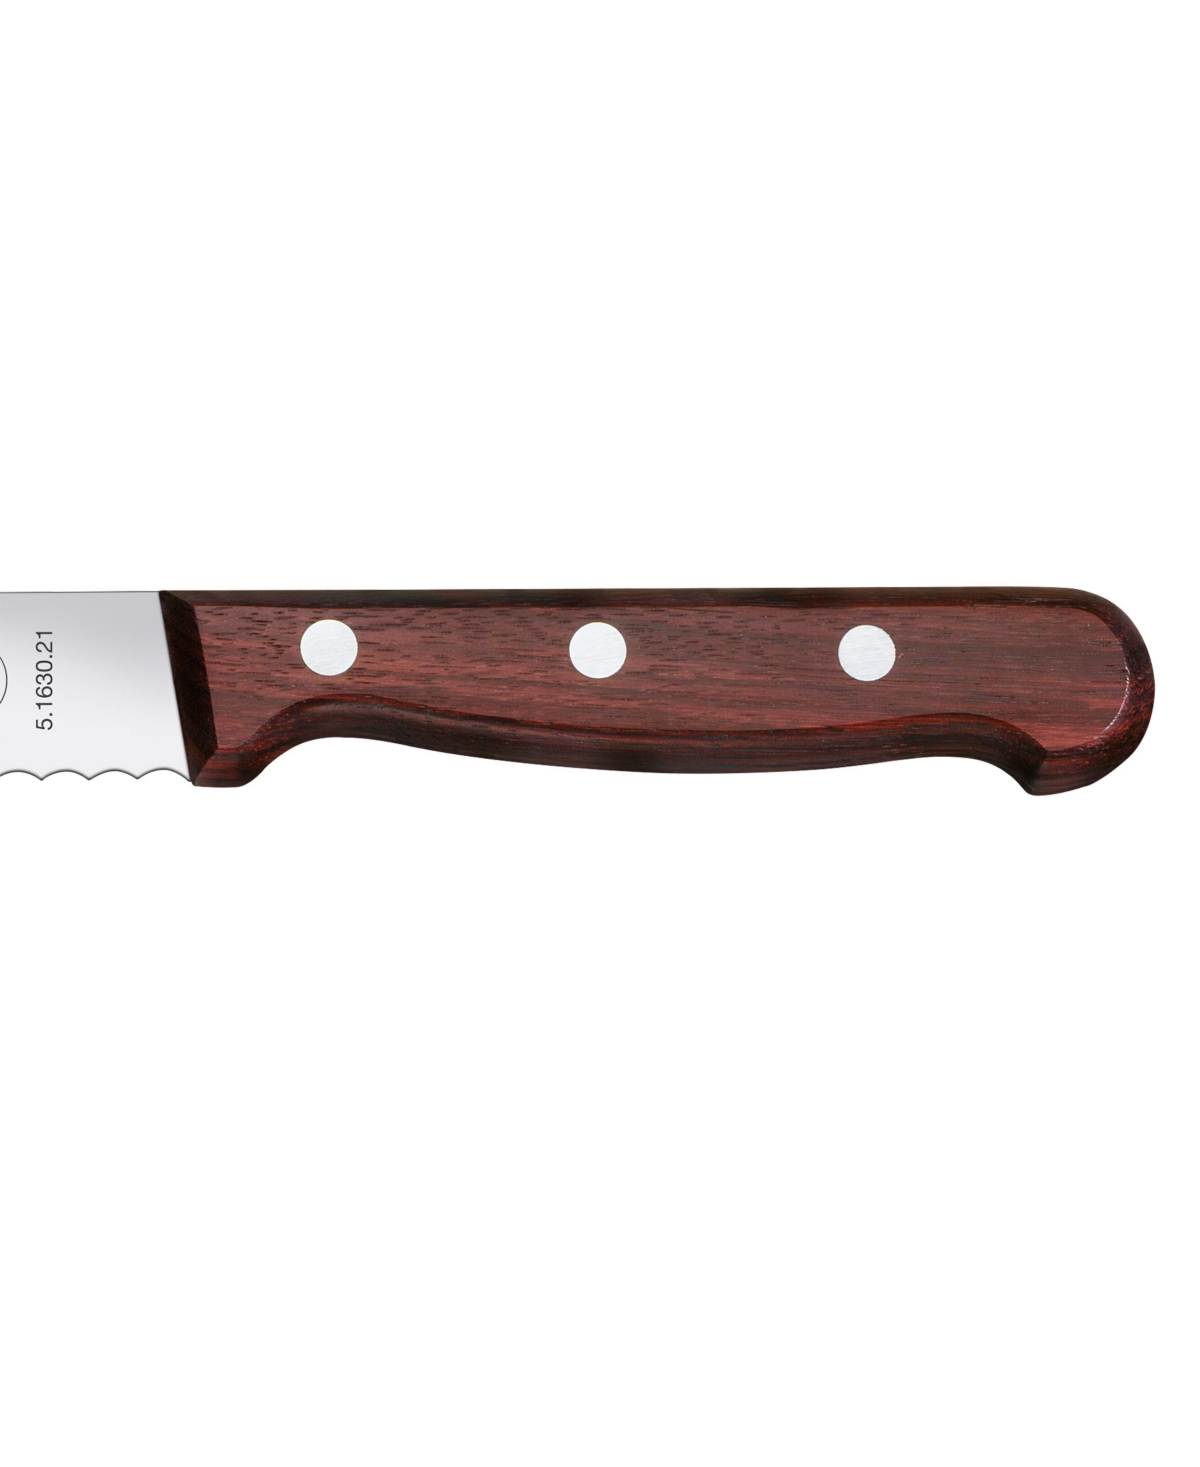 Shop Victorinox Stainless Steel 8.3" Bread Knife With Wood Handle